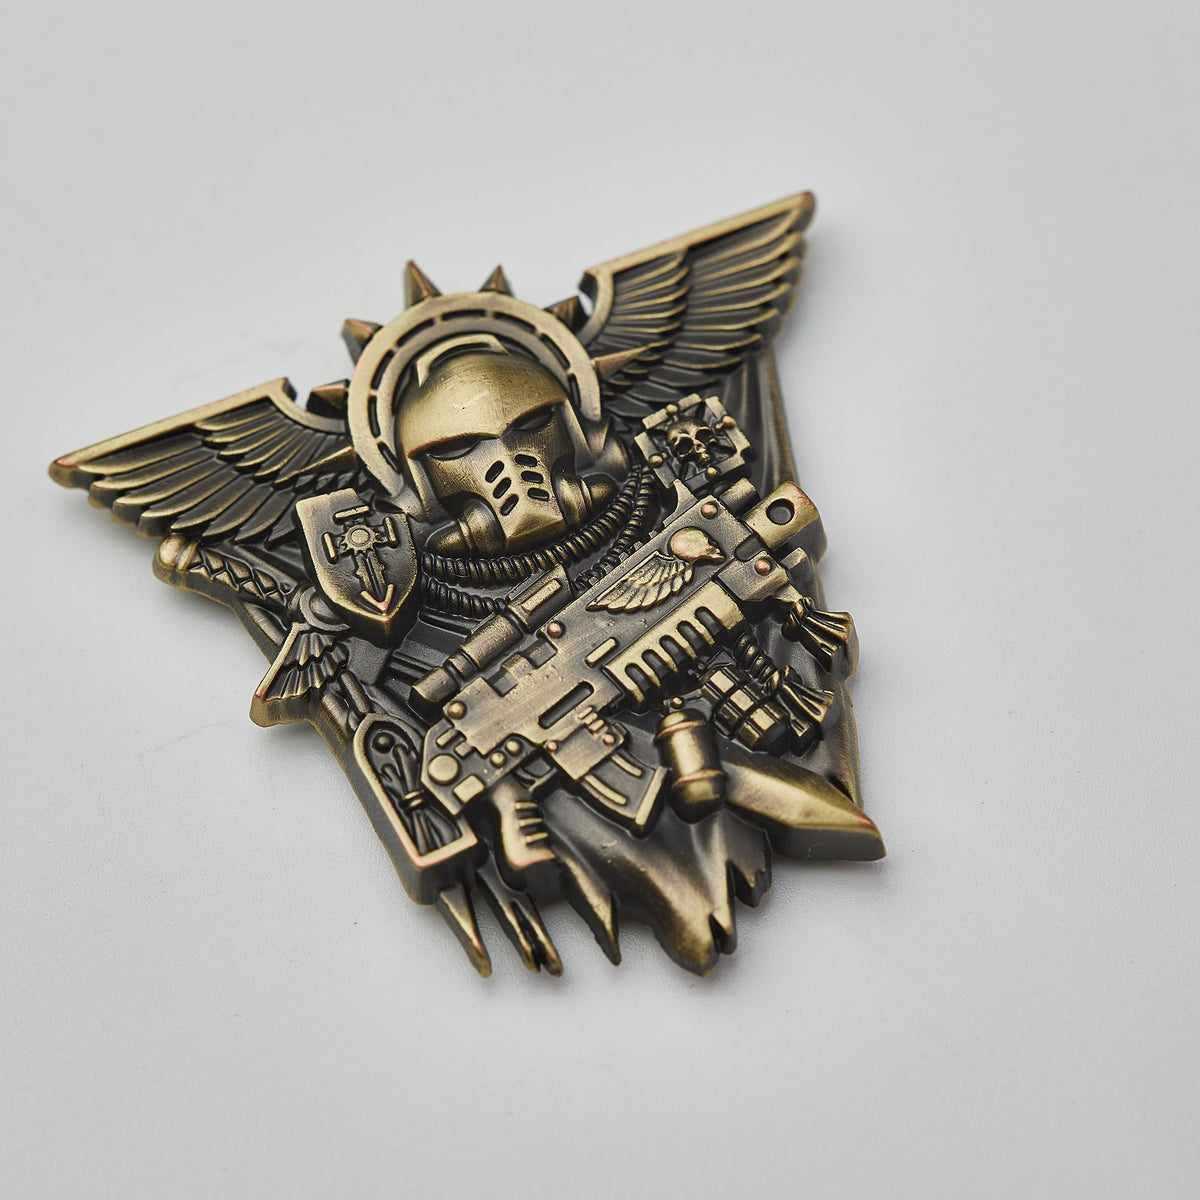 Starforged Star Casting] Raven Guard Exclusive Brooch Warhammer 40K  Peripherals Anime Gifts Free Shipping Alloy - AliExpress